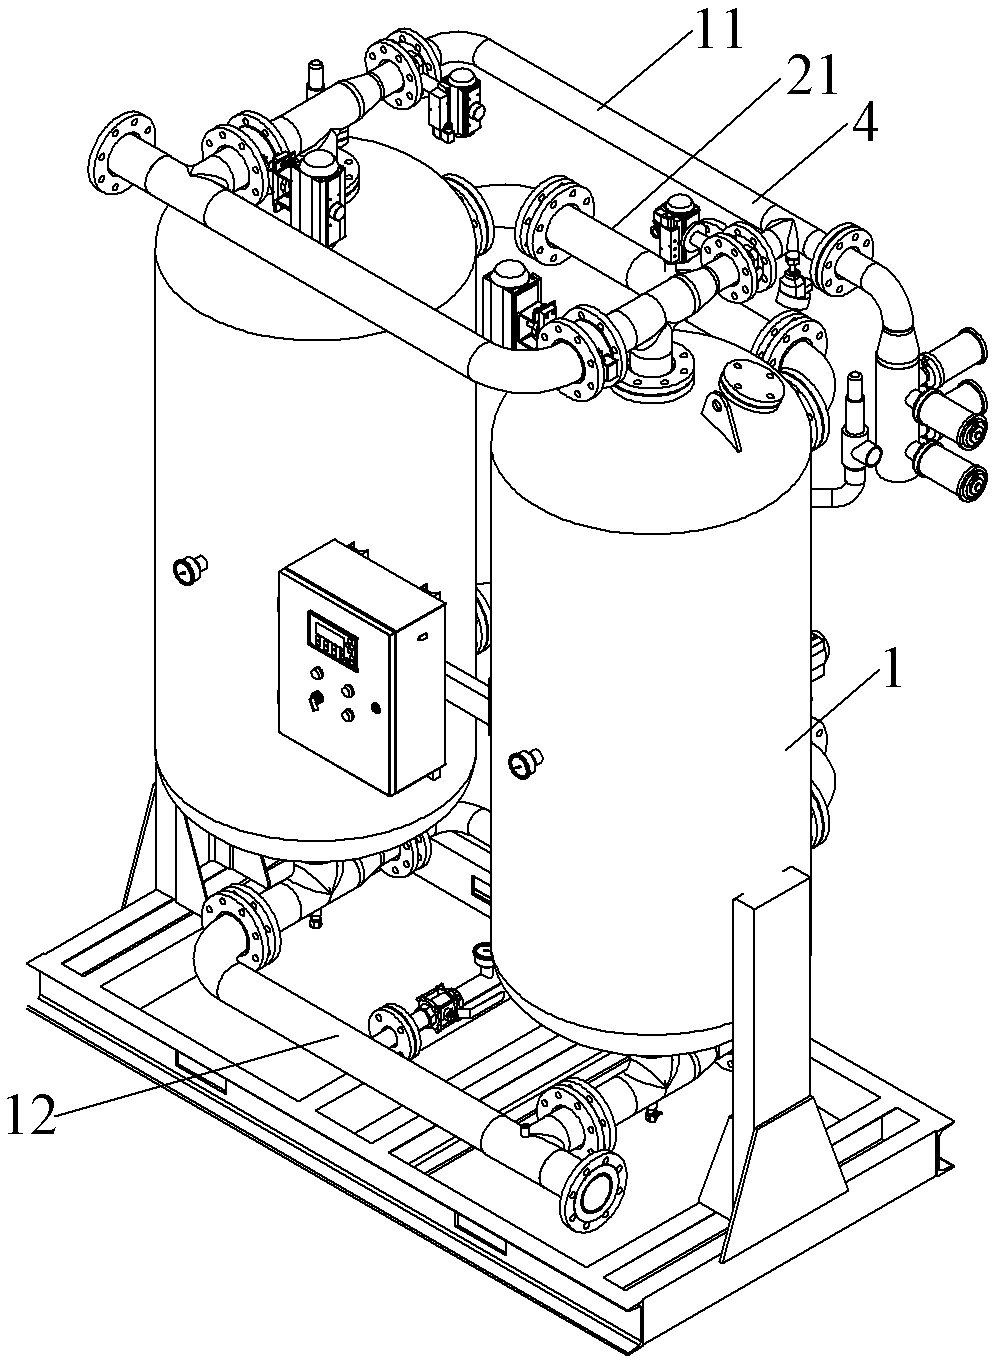 Water-containing gas dryer